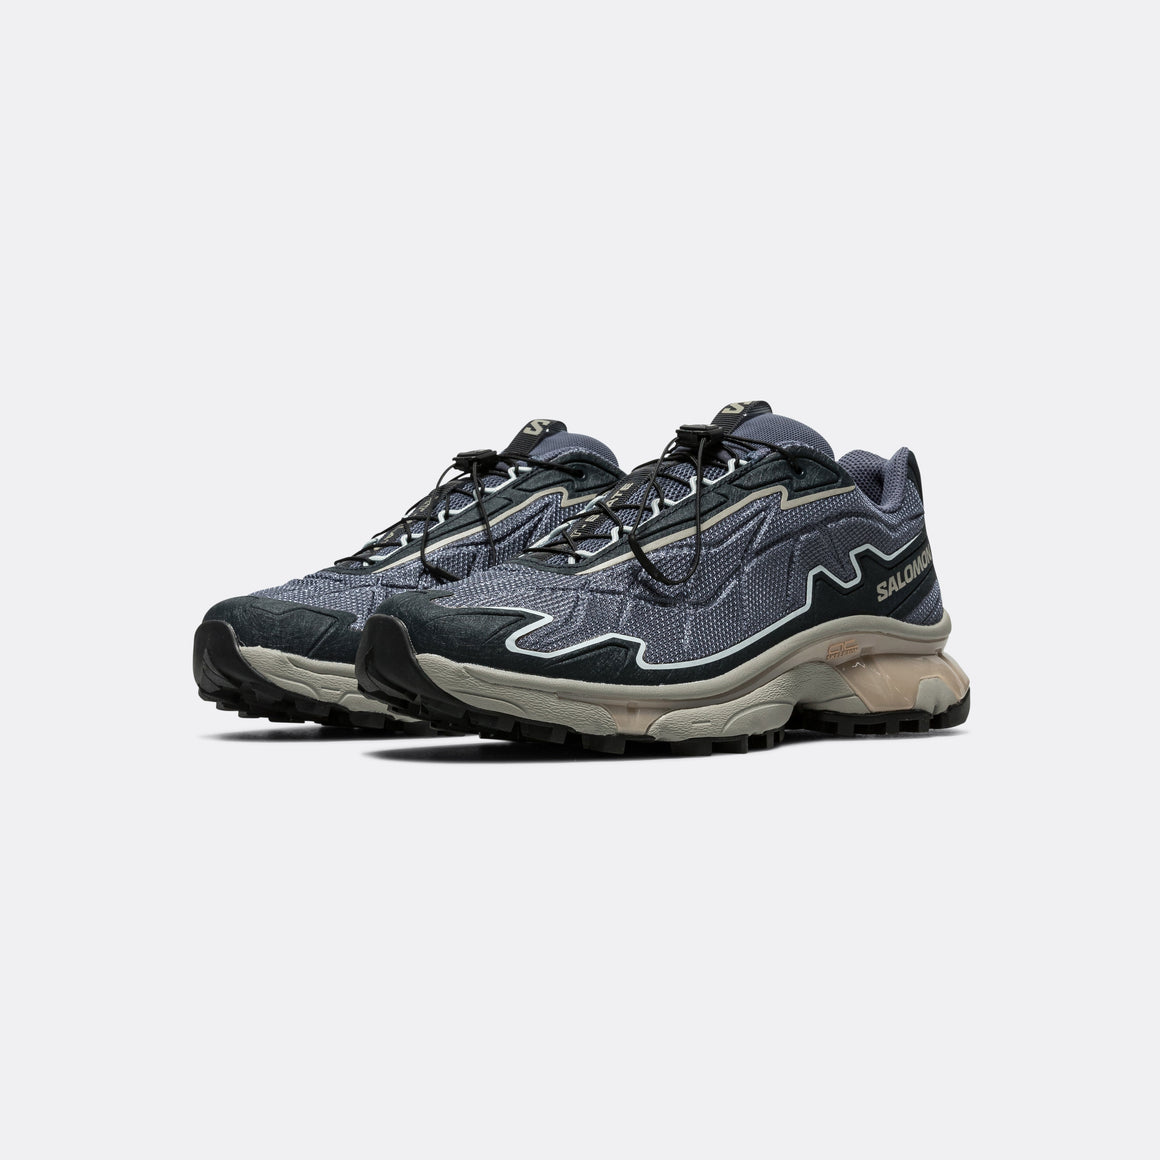 Salomon - XT-SLATE - Moonlight Blue/Carbon-Ghost Gray - UP THERE